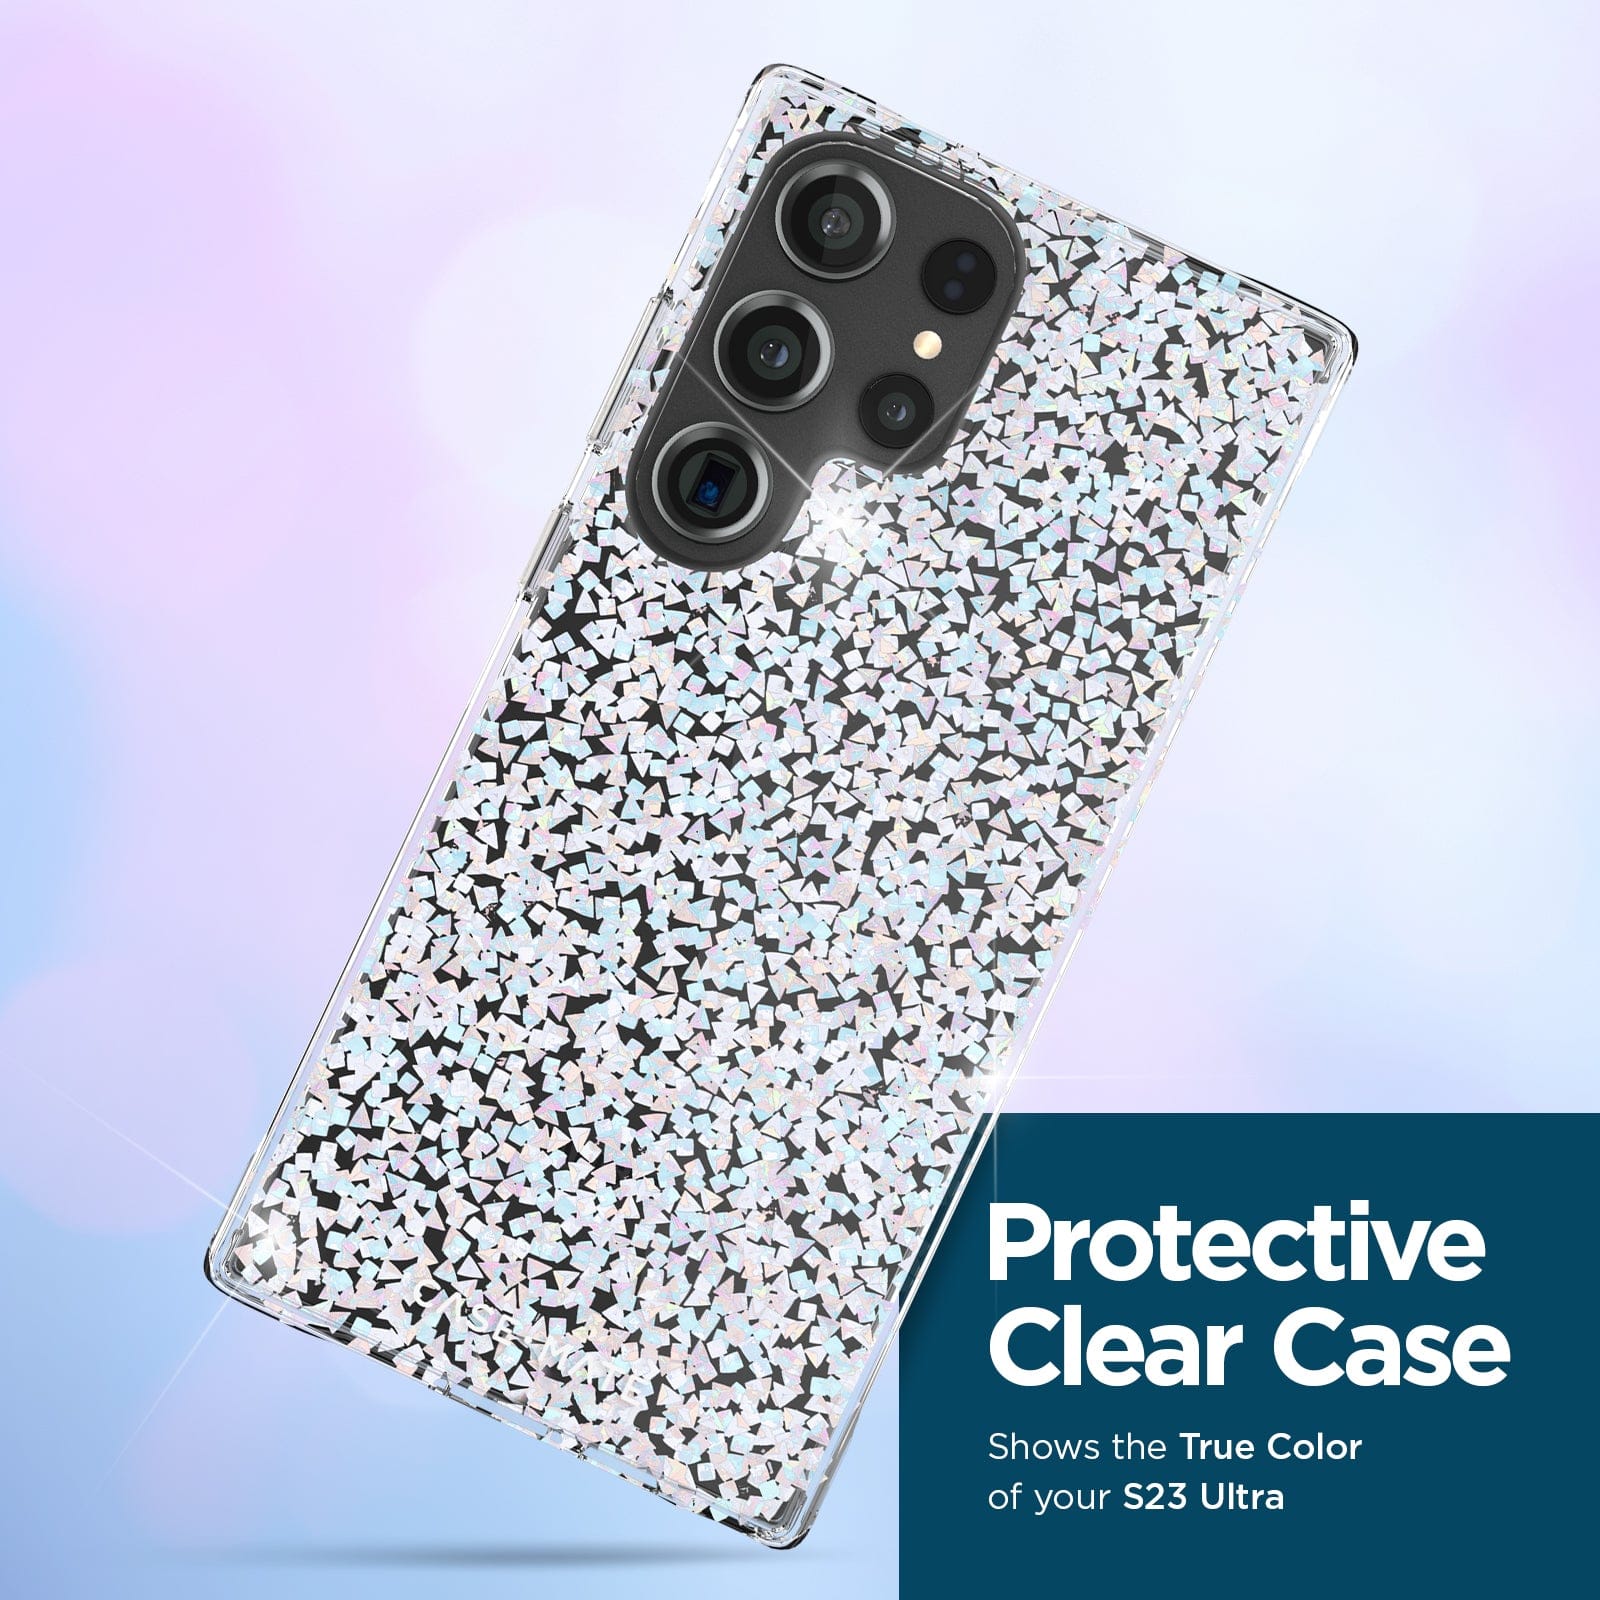 PROTECTIVE CLEAR CASE. SHOWS THE TRUE COLOR OF YOUR S23.